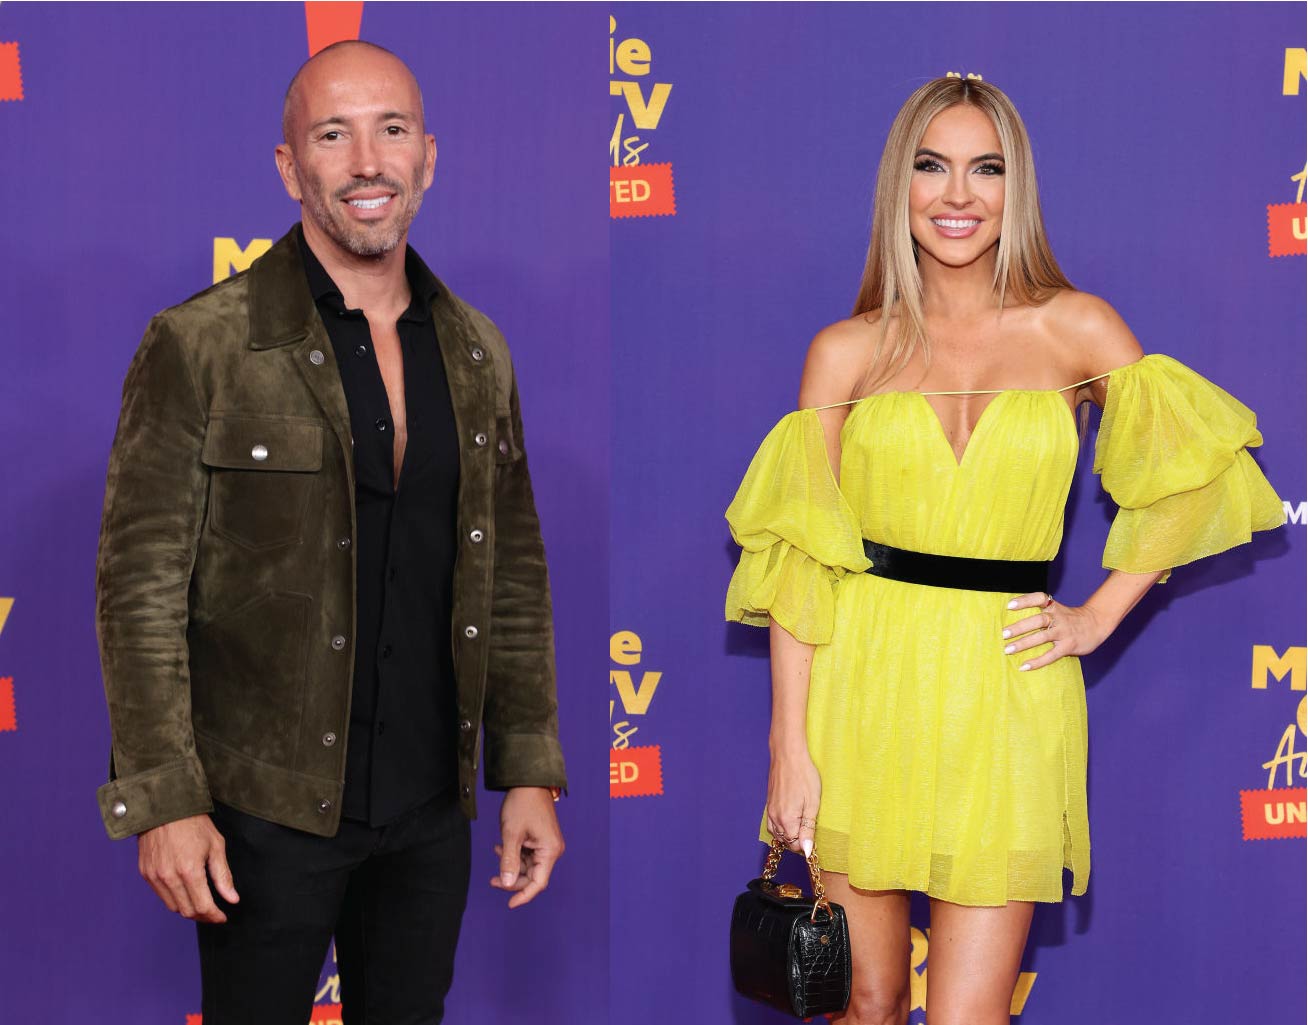 Chrishell Stause Dates Co-Star Jason Oppenheim After Being Inspired From This A-Star Couple